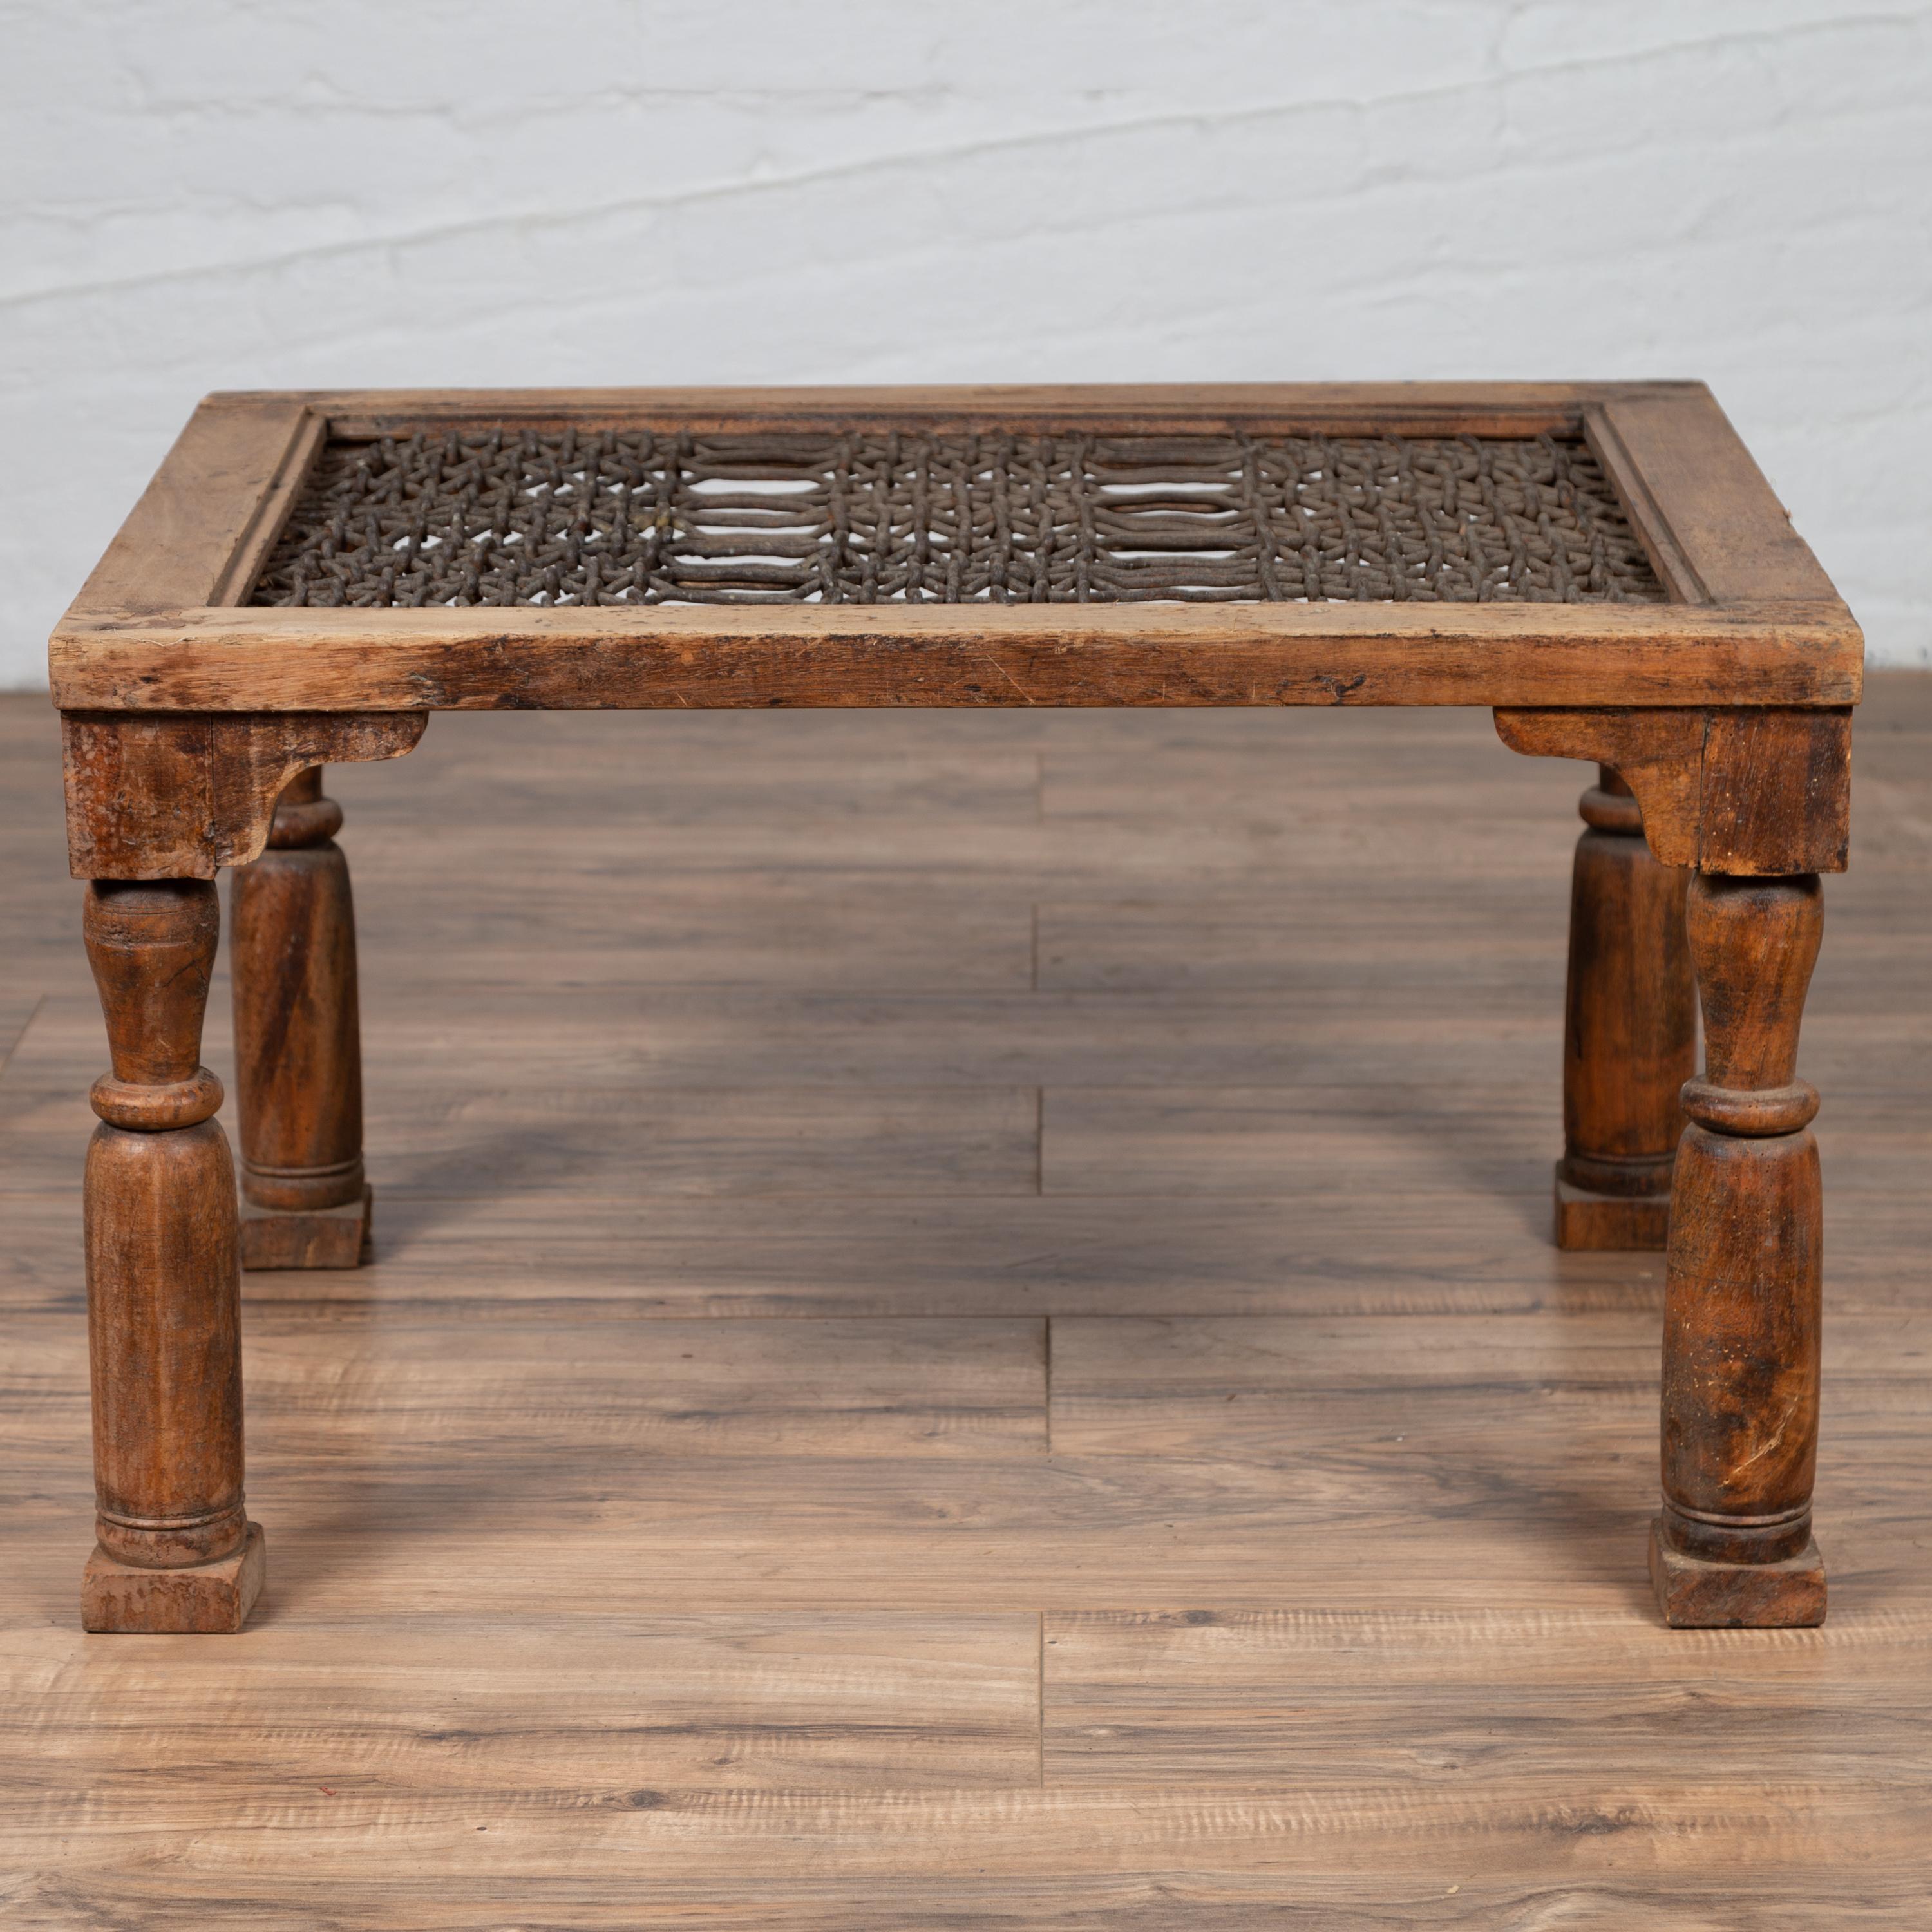 Antique Indian Wooden Side Table with Window Grate and Turned Baluster Legs For Sale 3